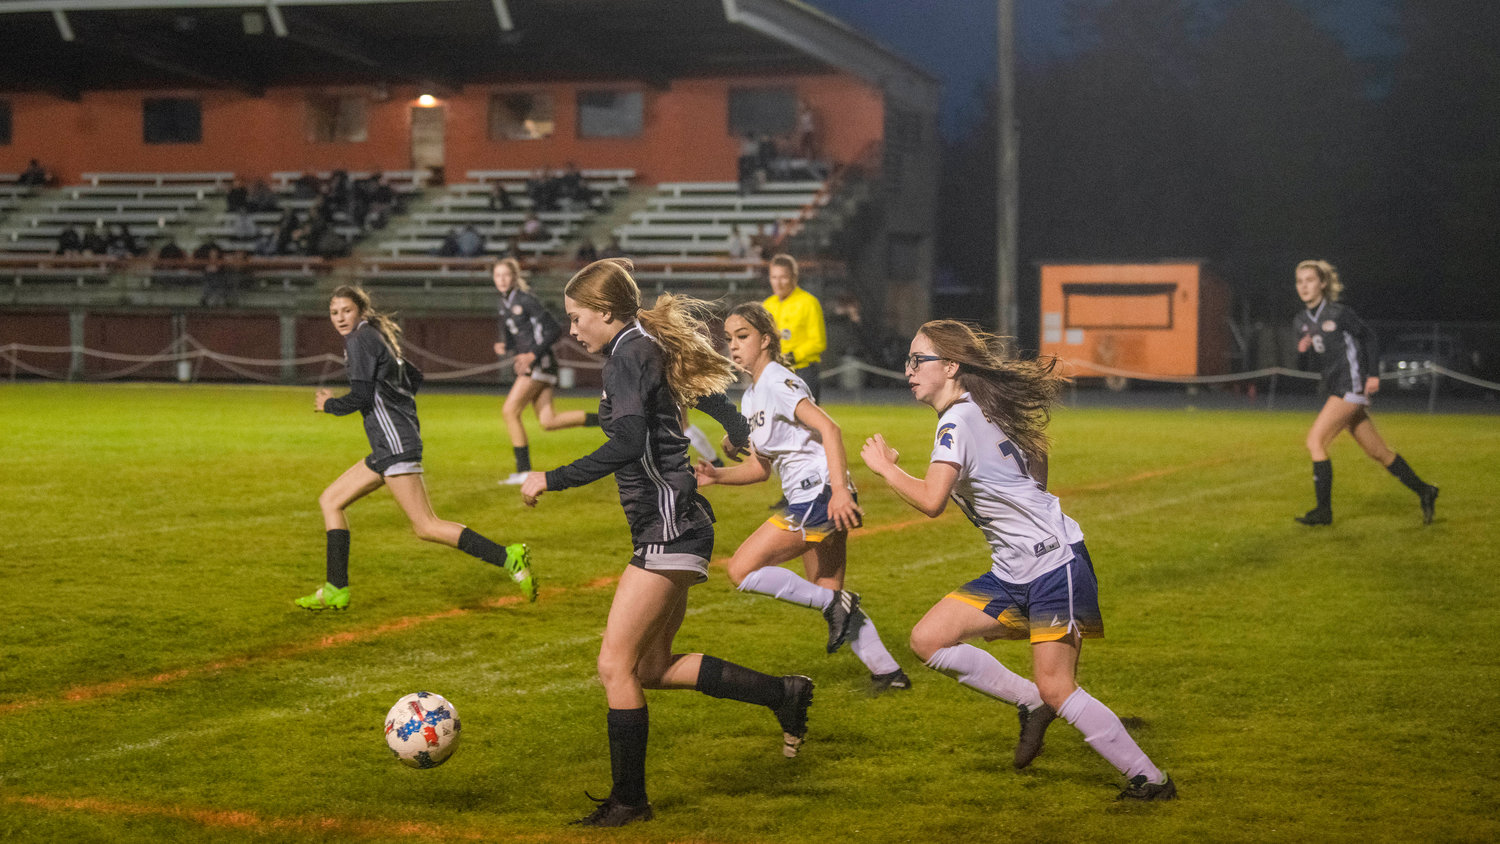 Tigers take control of the ball and move it down the field Monday night during a game against Forks.